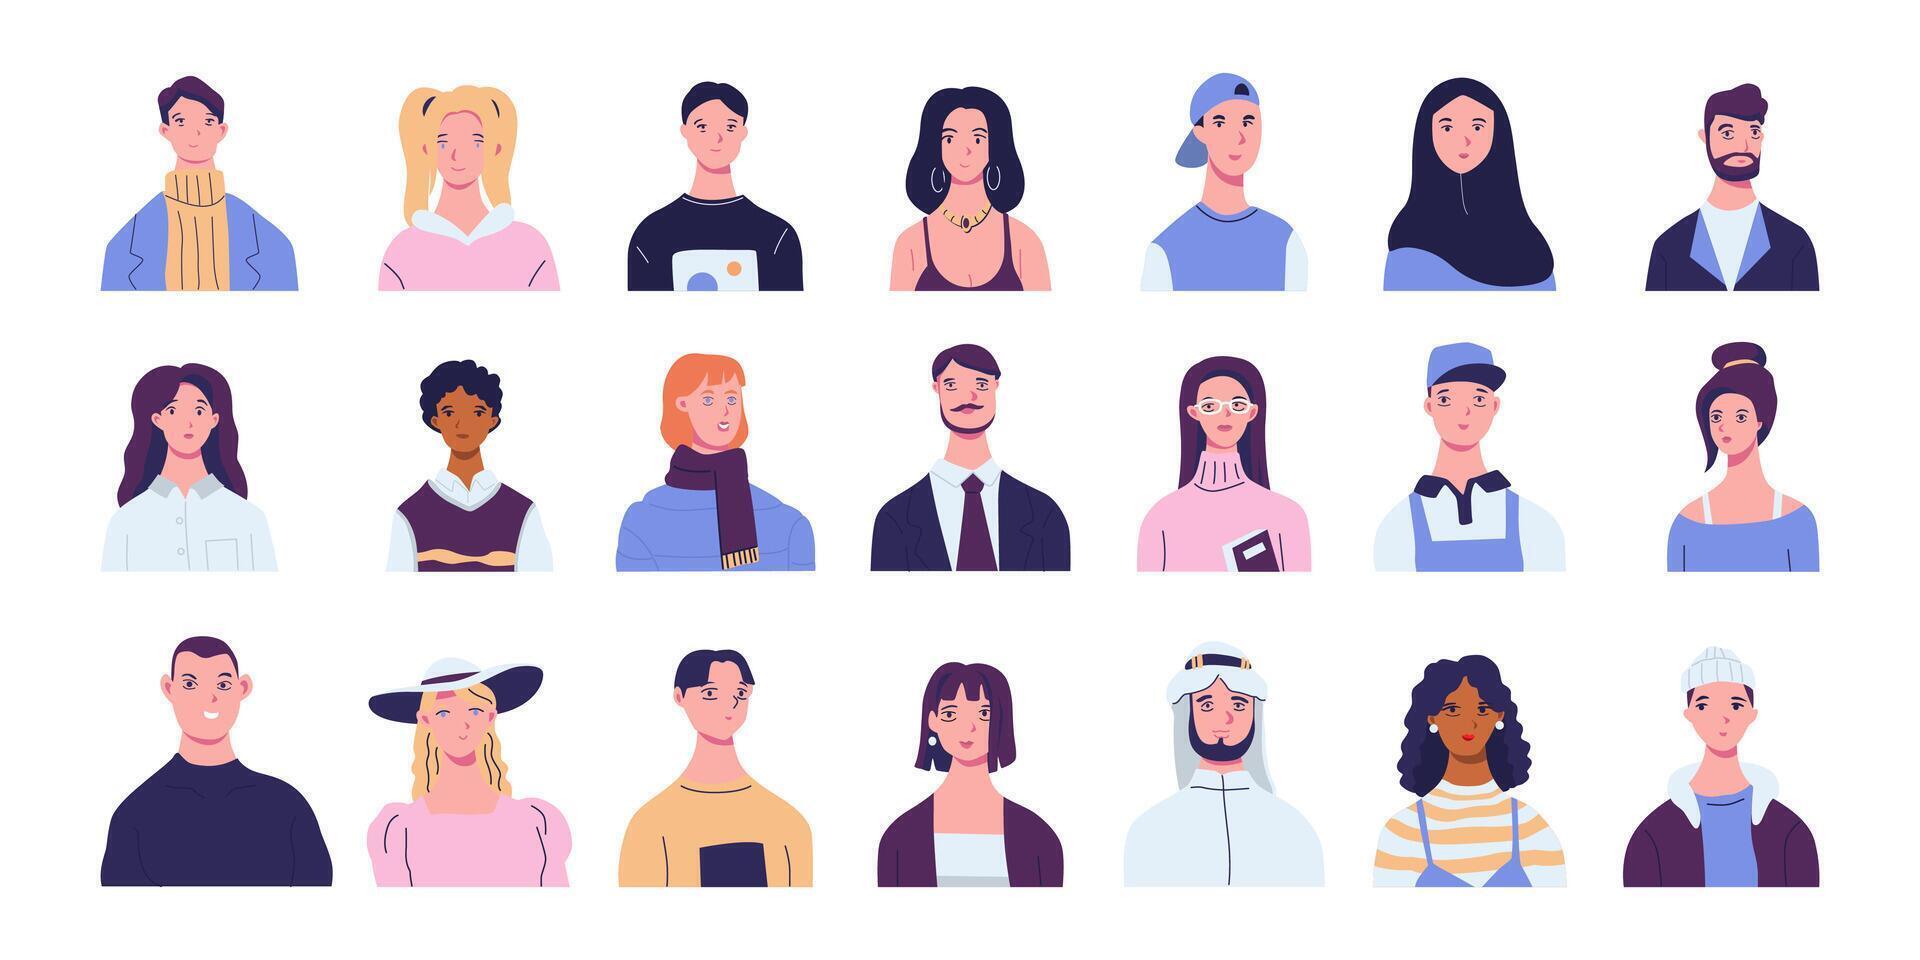 People head portraits set. Diverse men and women faces of different age and race. Happy modern young and old person avatars. Characters bundle. vector